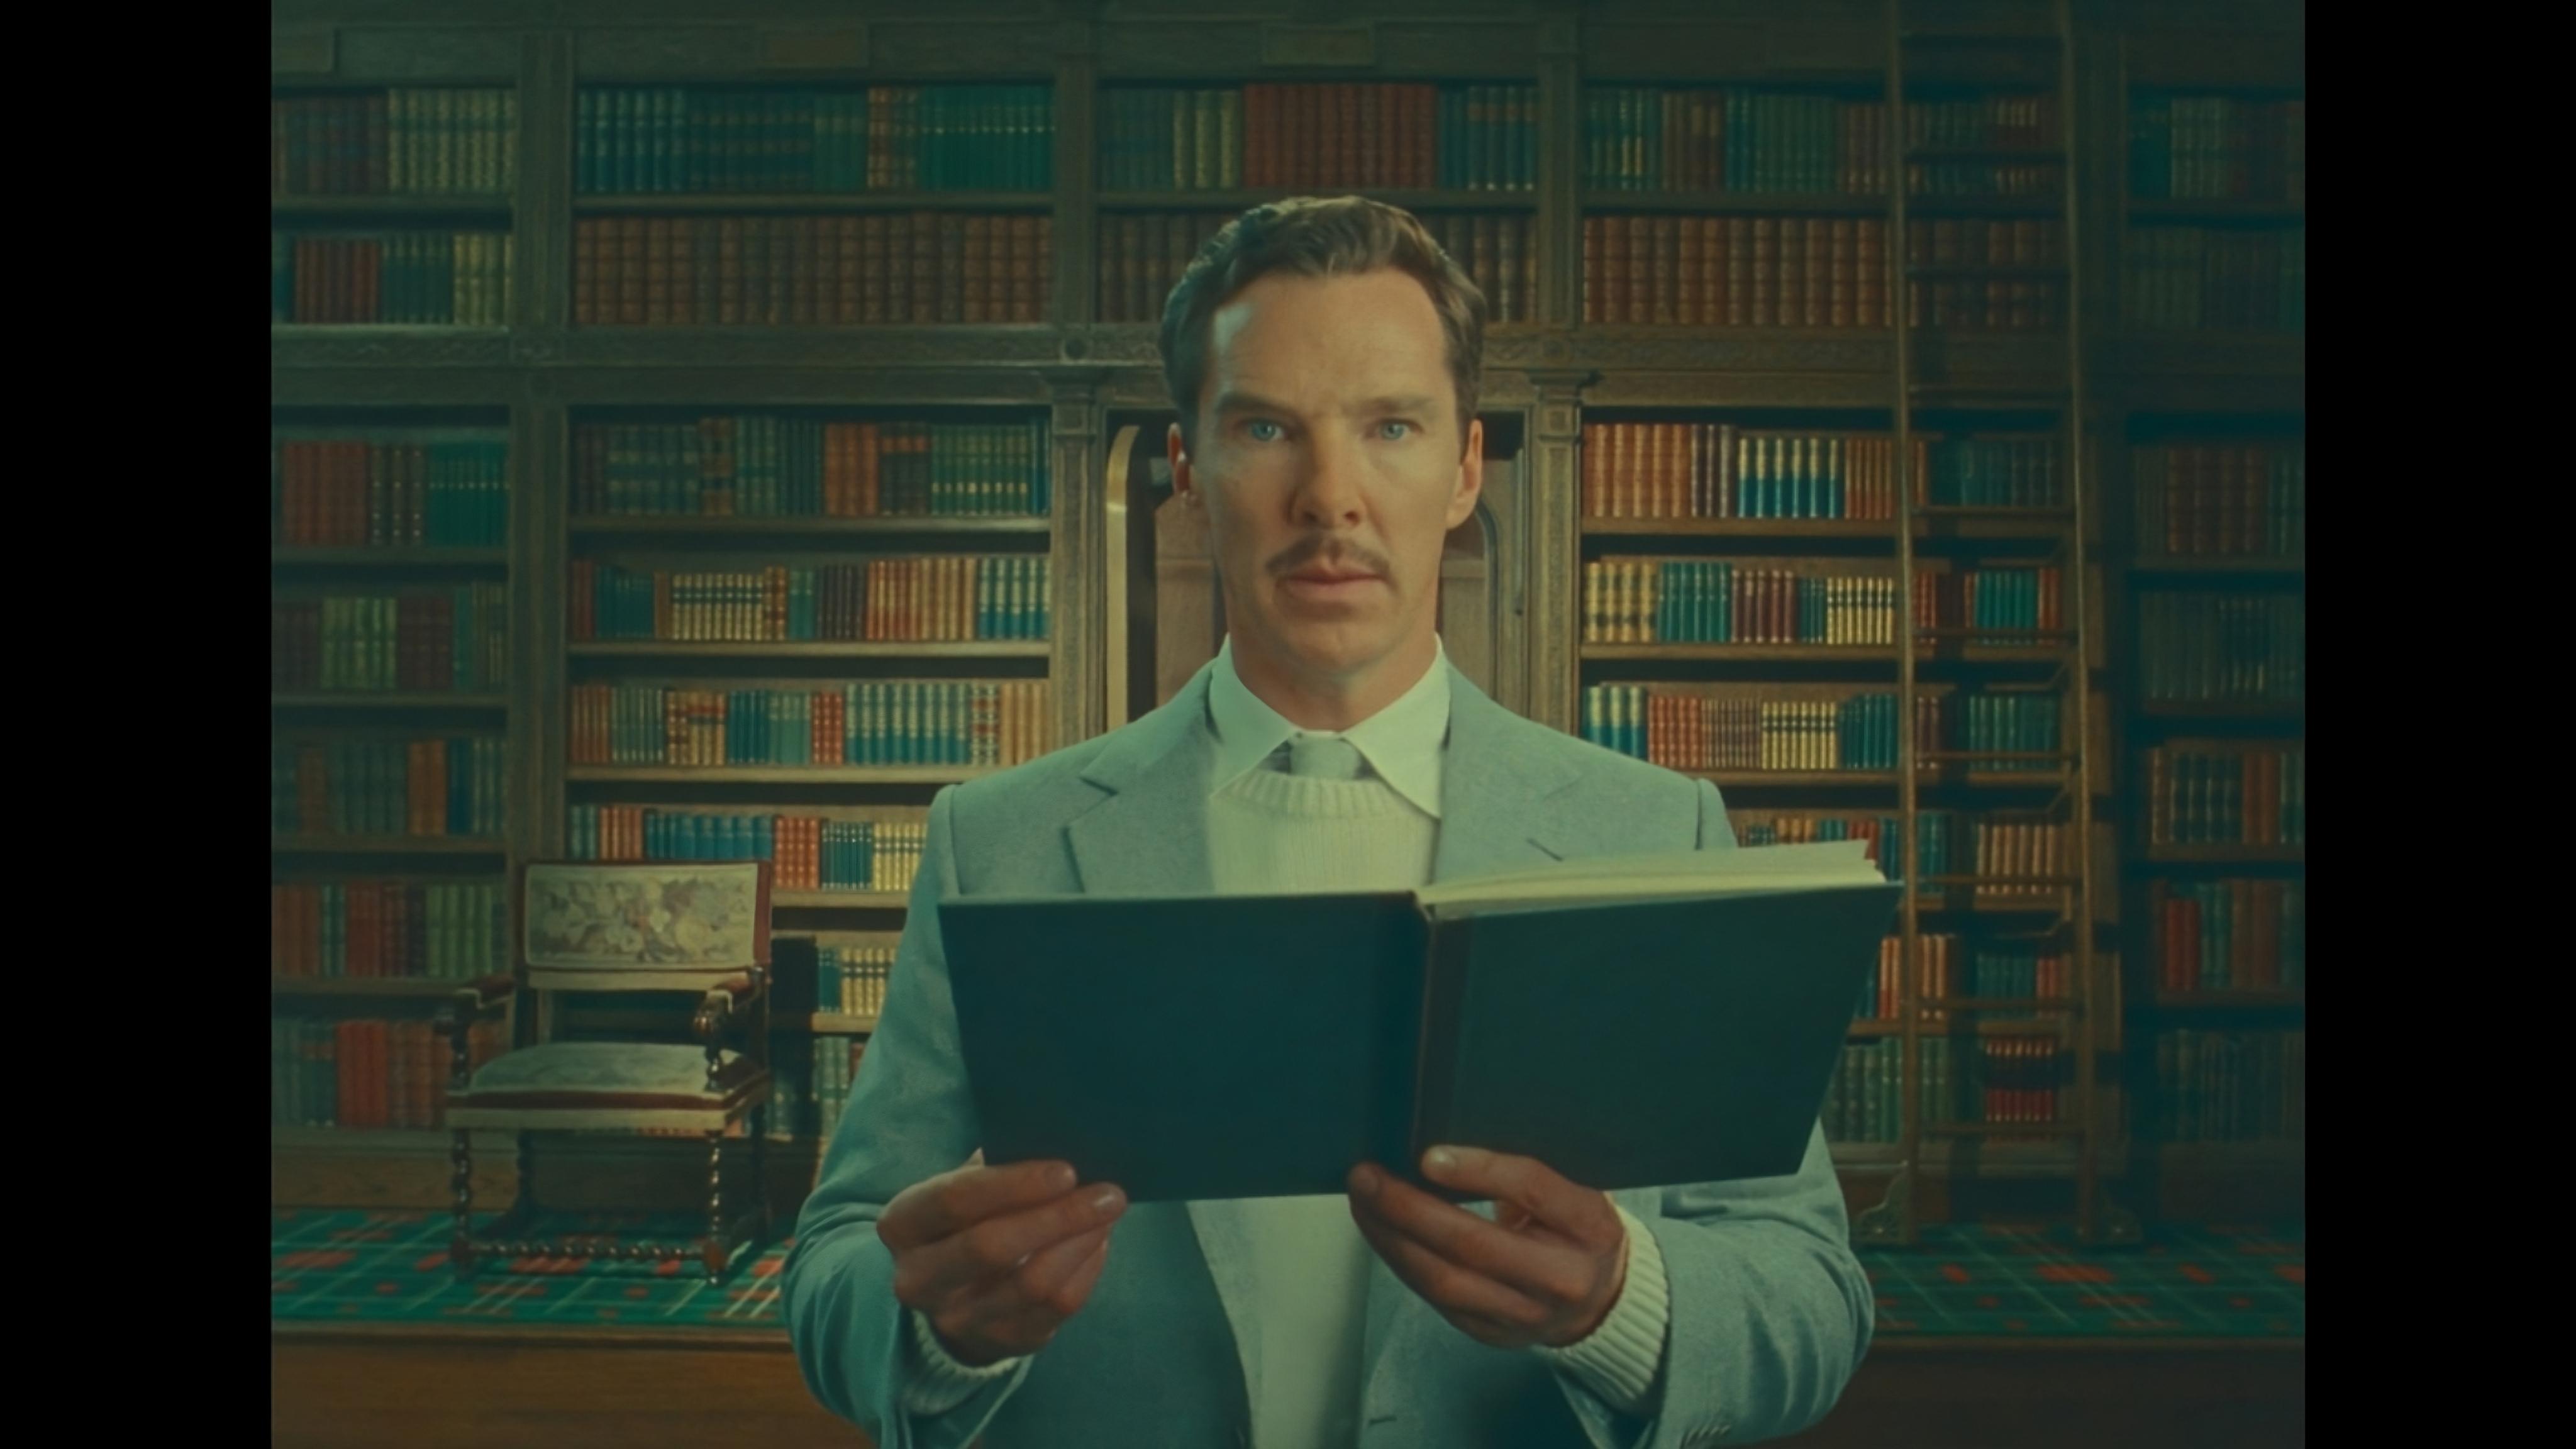 Intrigued by this revelation, Henry embarks on a quest to acquire the same skill with the intention of using it for gambling. The film boasts an all-star cast, with Benedict Cumberbatch in the lead role, supported by Ralph Fiennes, Dev Patel, and Ben Kingsley in pivotal roles. Prepare to be enchanted by Anderson's signature storytelling in this Netflix gem.